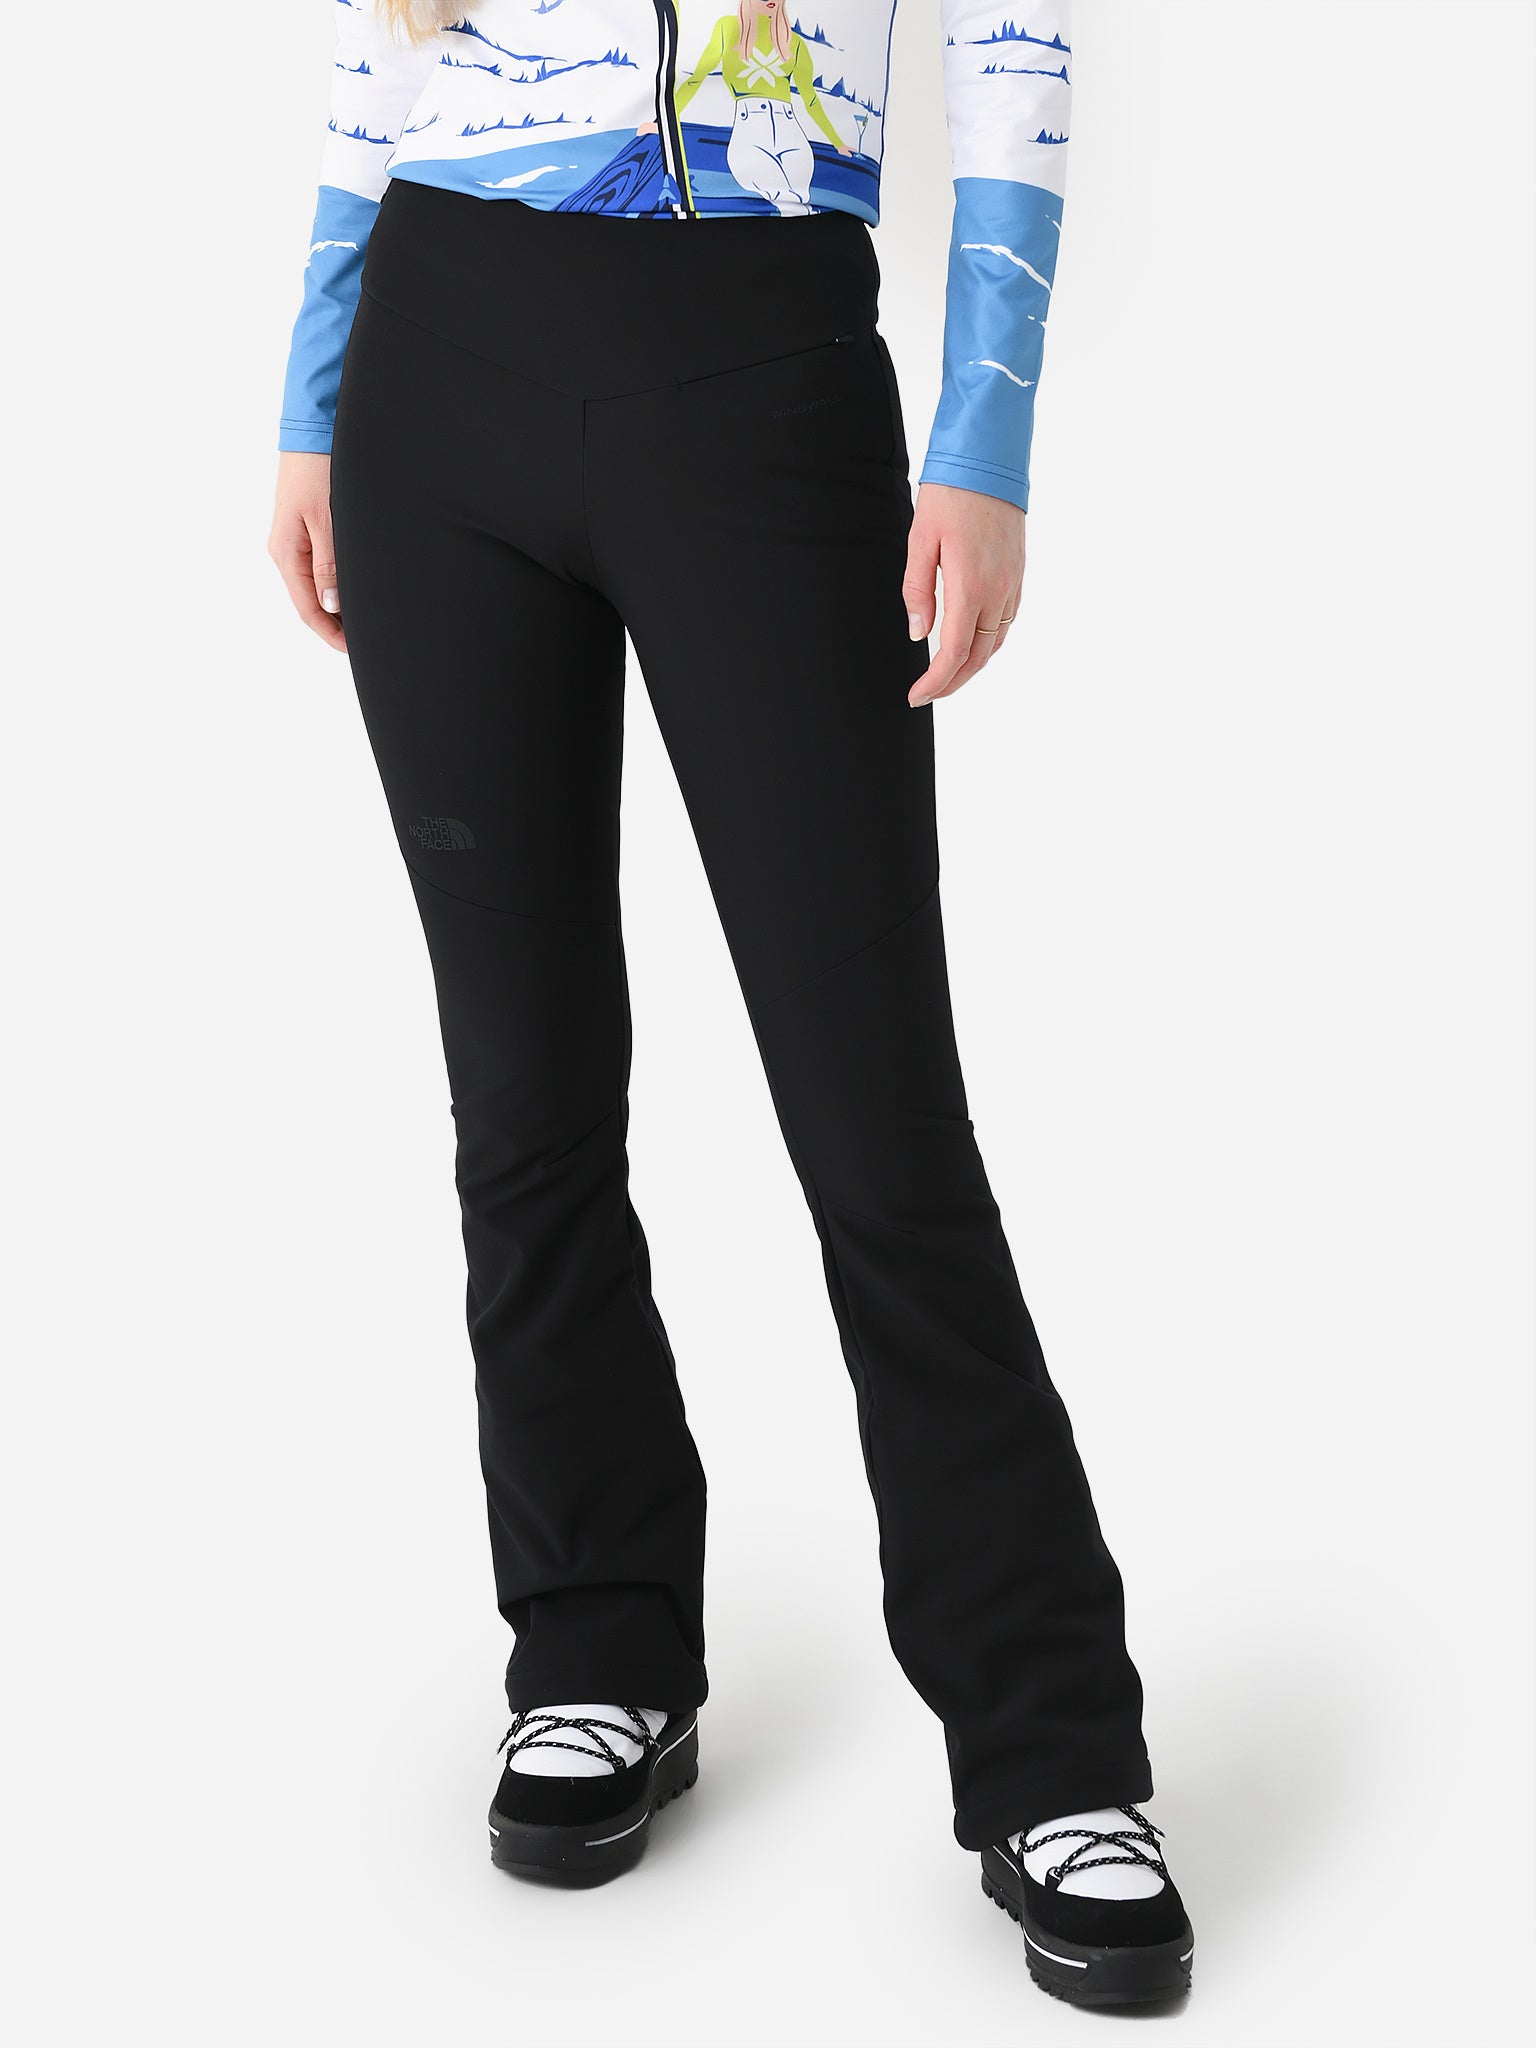 THE NORTH FACE Women's Apex STH Snow Pant